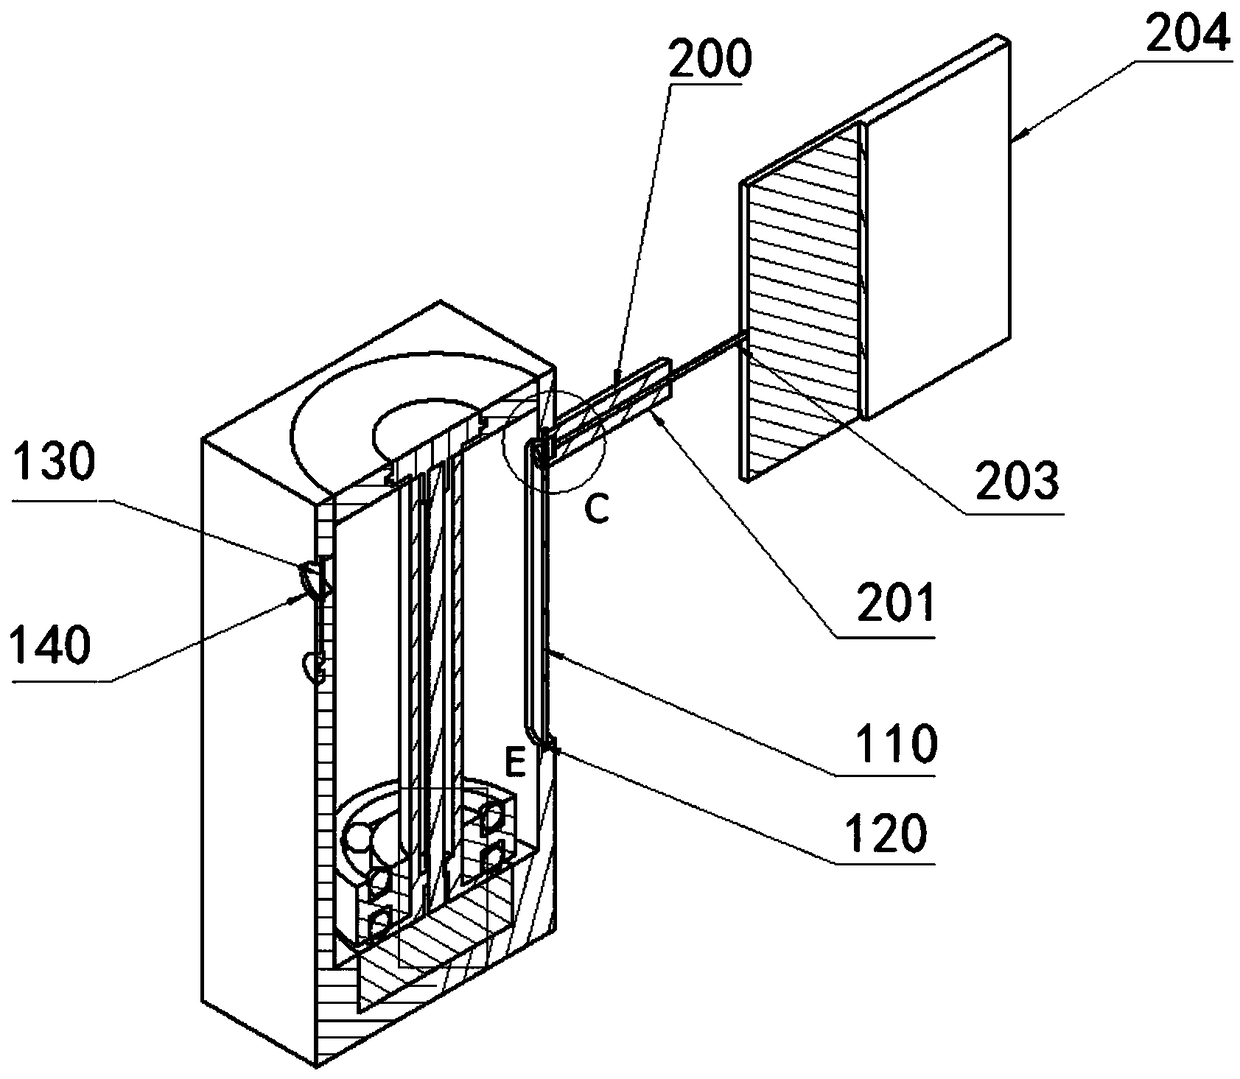 Bearing storage observing device